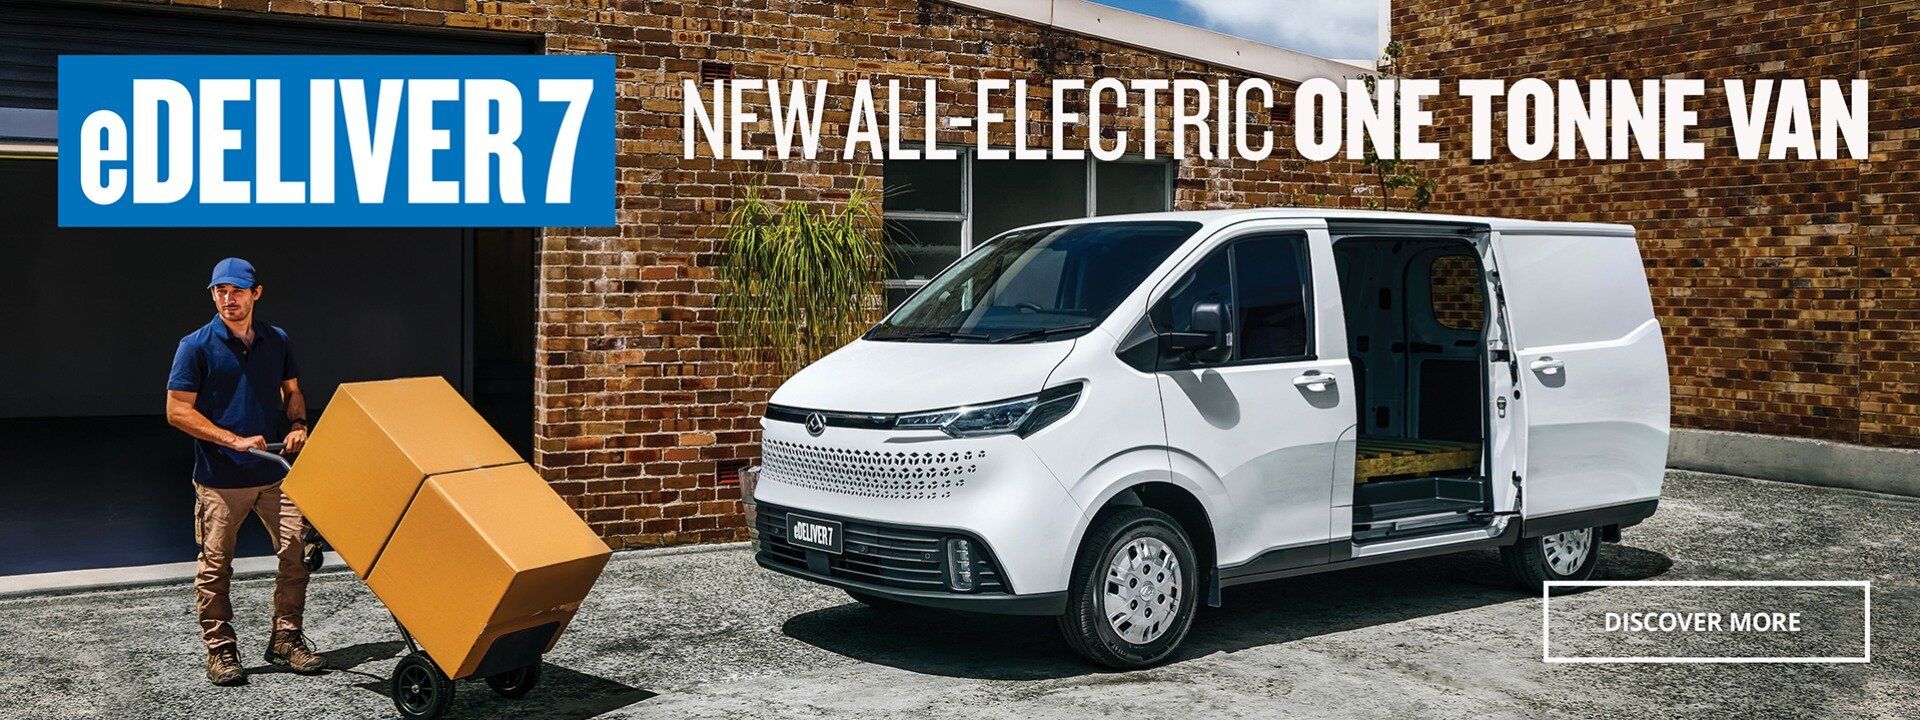 NEW ALL-ELECTRIC ONE TONNE VAN | eDeliver 7